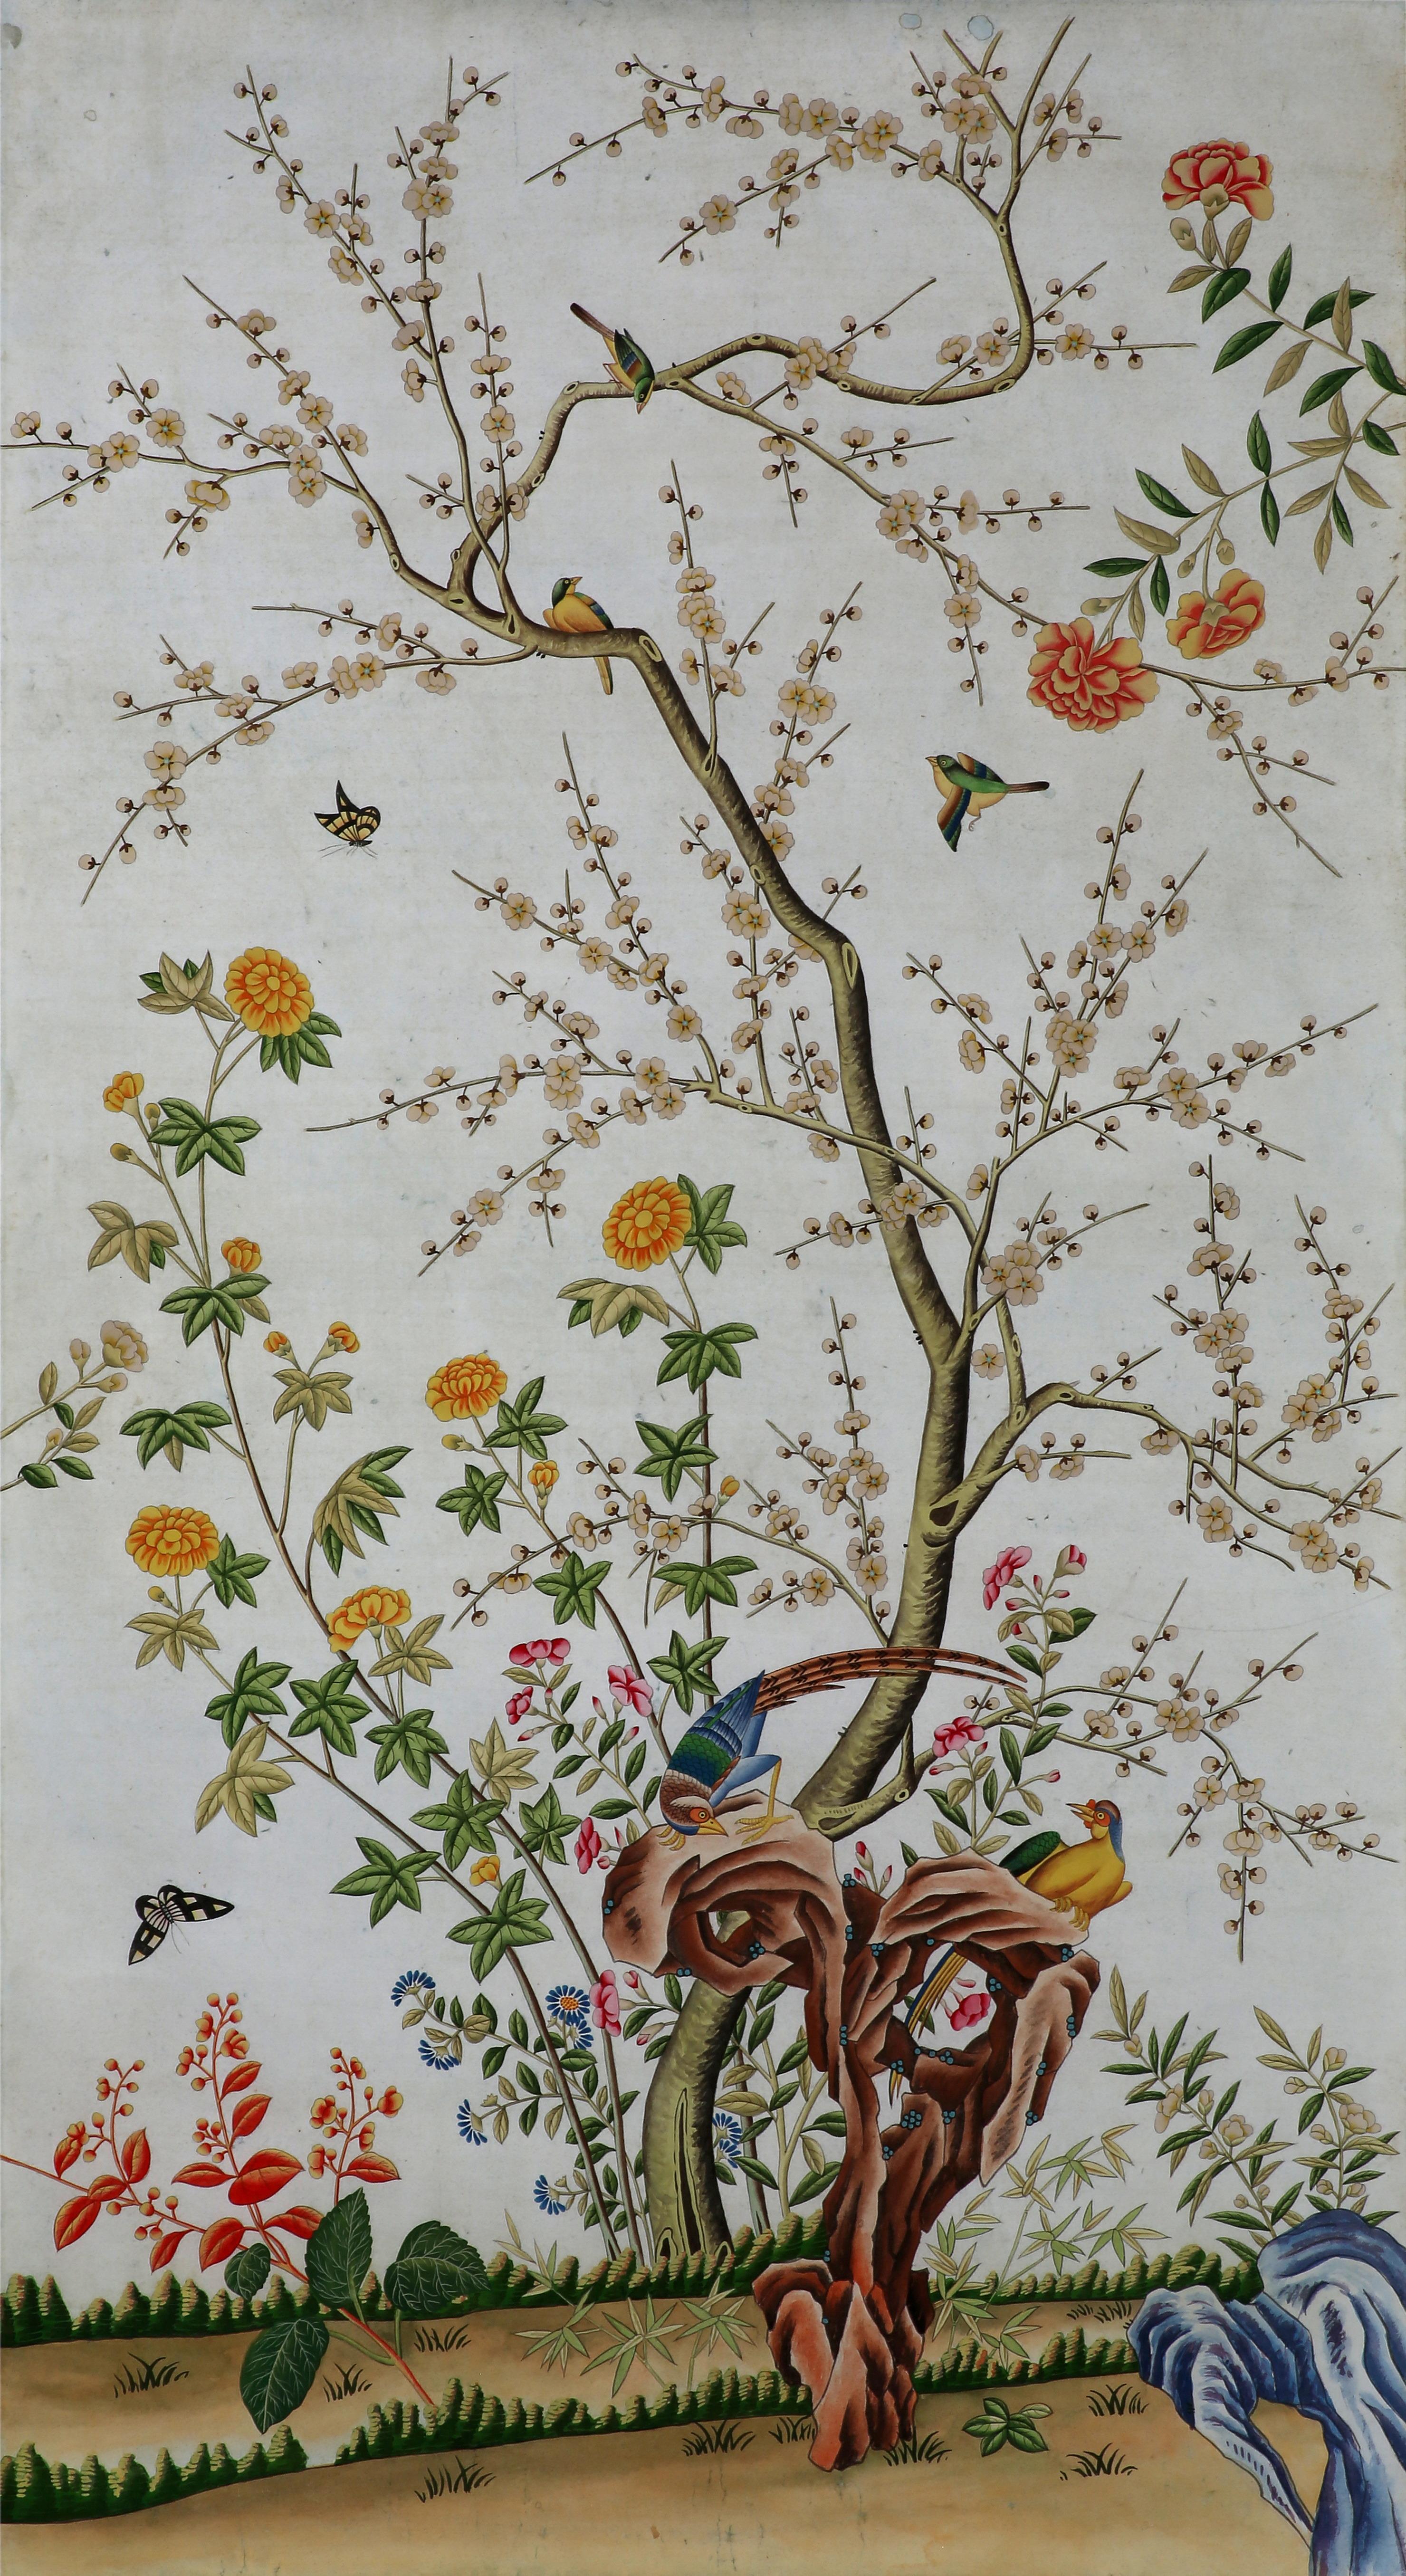 The fine pair of wallpaper panels hand painted in watercolor on rice paper, reproducing the 19th century Chinese export chinoiserie paintings of floral and bird motif on export wallpaper, from our studio. An antiquing process is applied to the